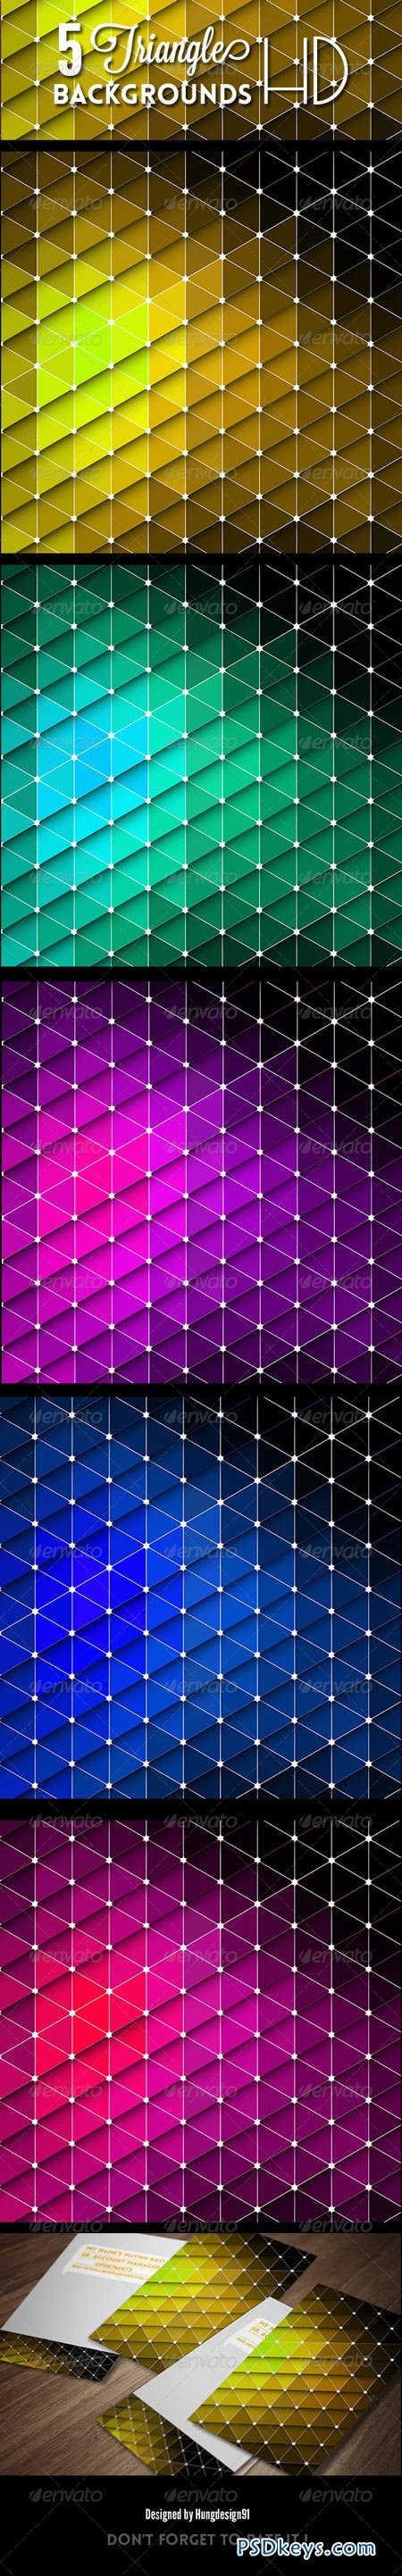 5 Triangle Backgrounds HD 7111259